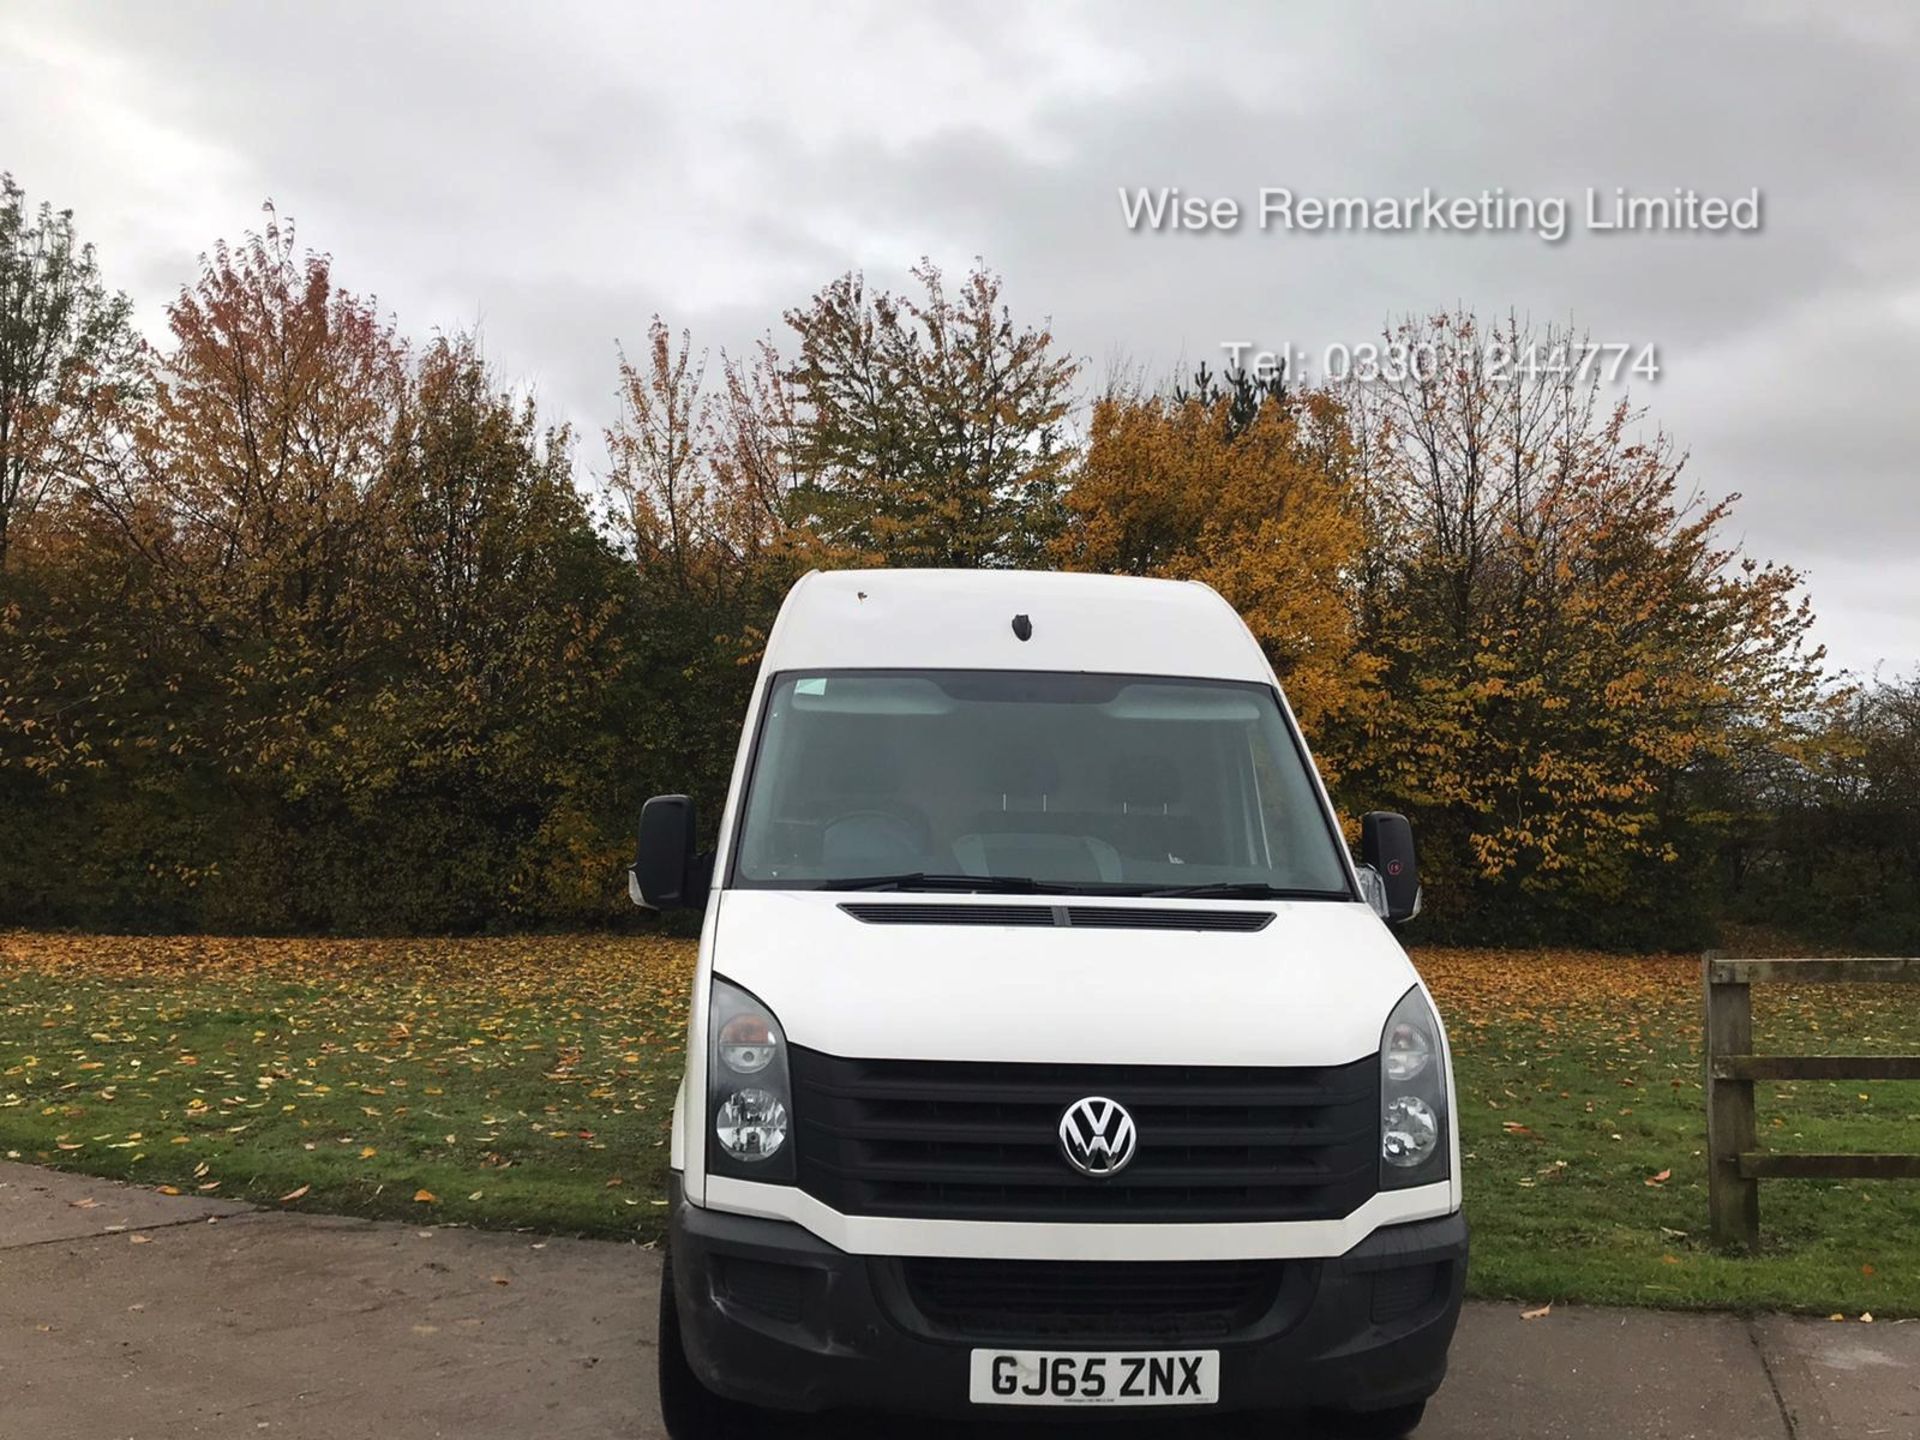 Volkswagen Crafter CR35 Startline 2.0l TDi - LWB - 2016 Model -1 Keeper From New - Service History - Image 2 of 15